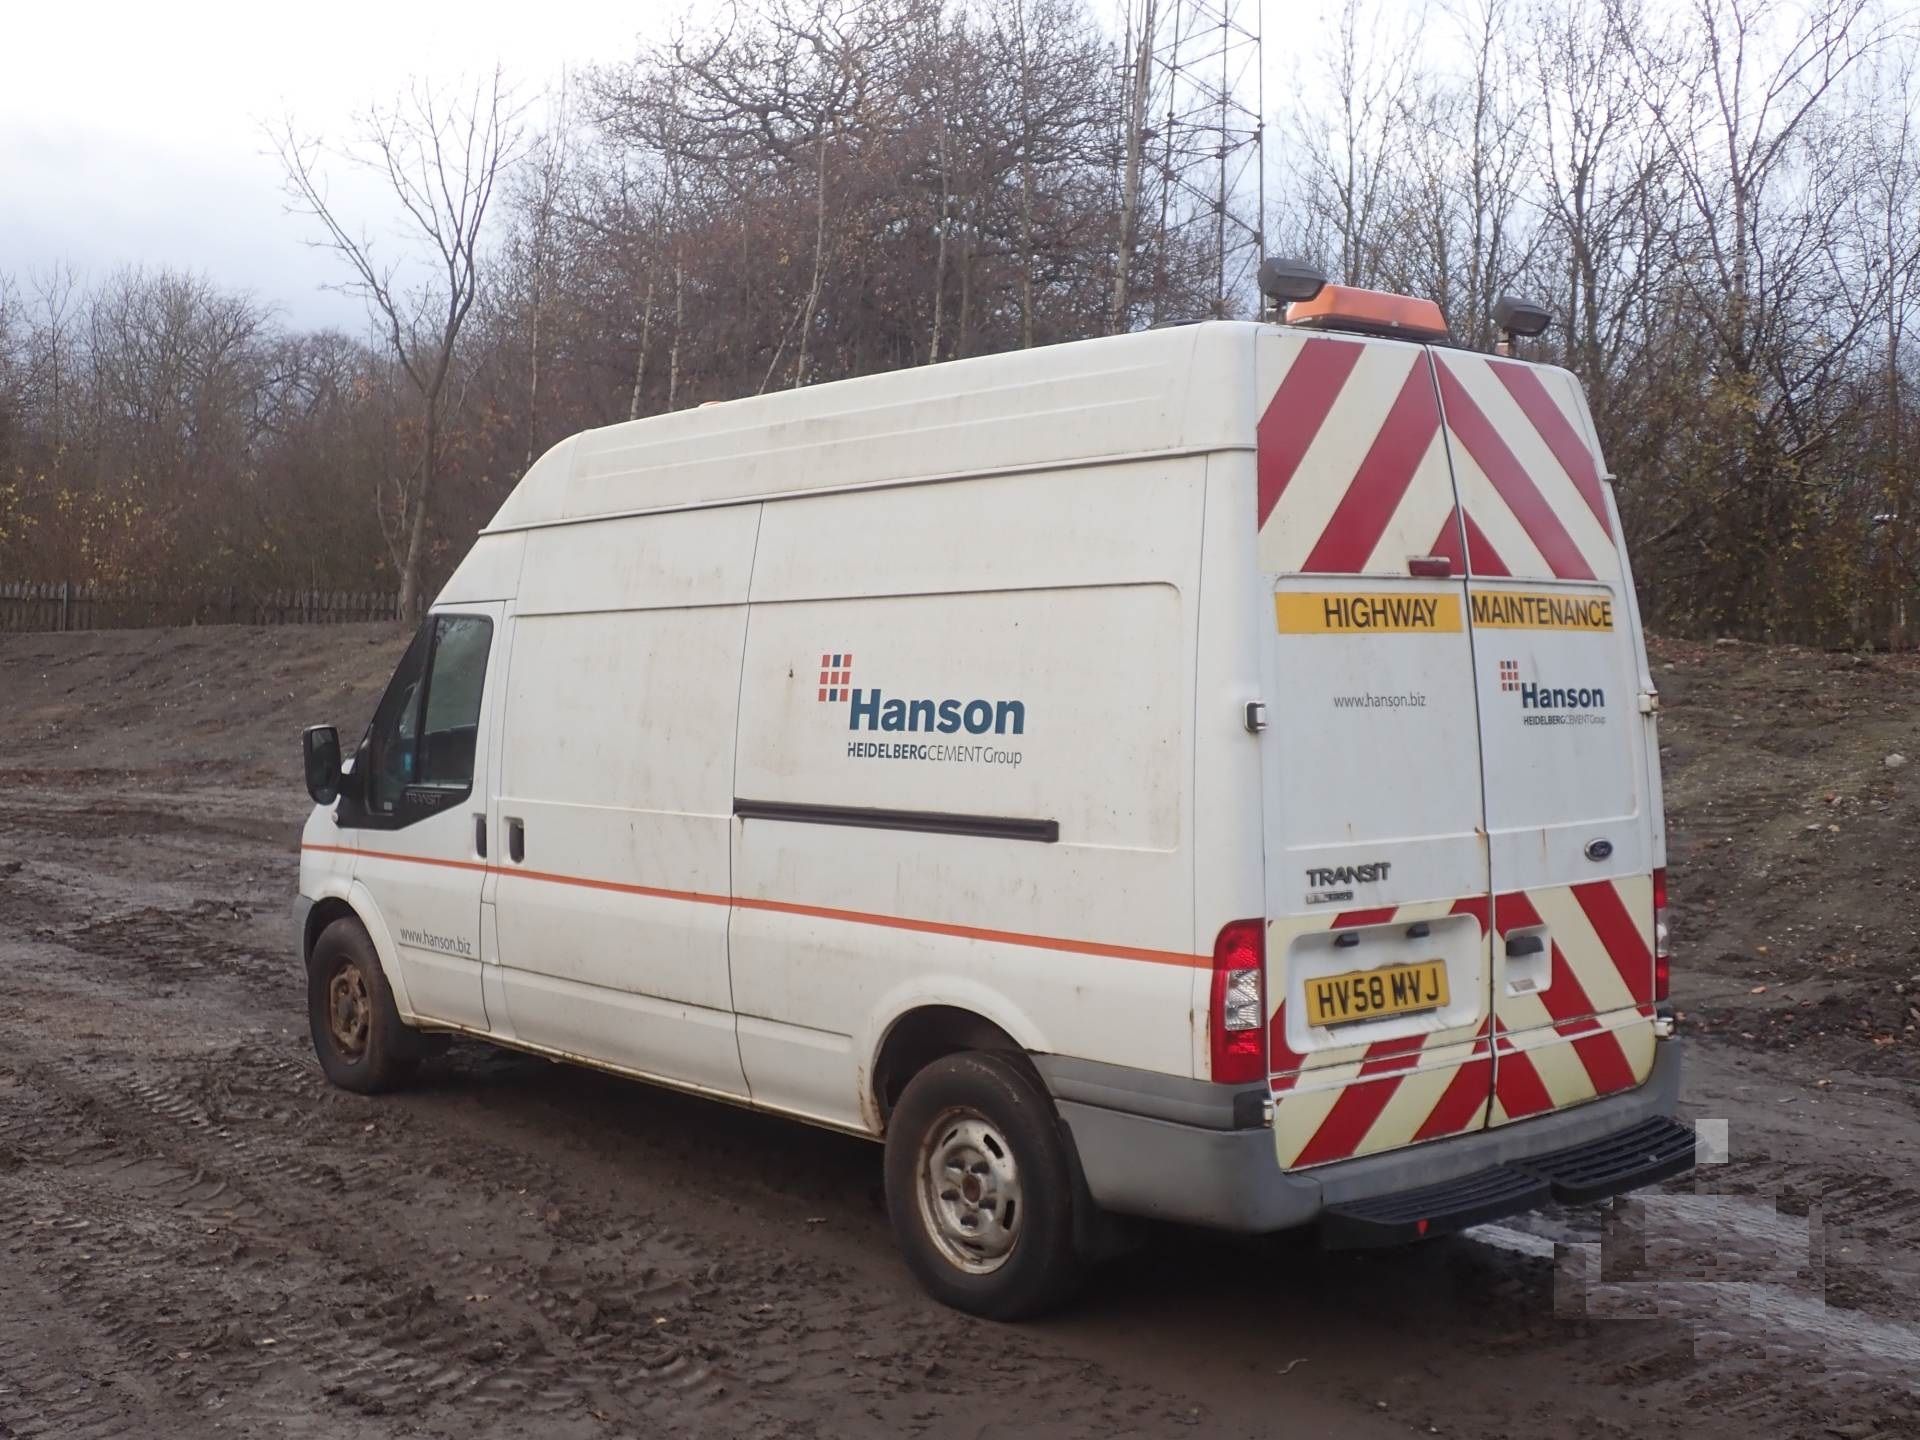 2008 Ford Transit 350 LWB 115 RWD 5 Door Panel Van - CL505 - Location: Corby, Northamptonshire - Image 5 of 12